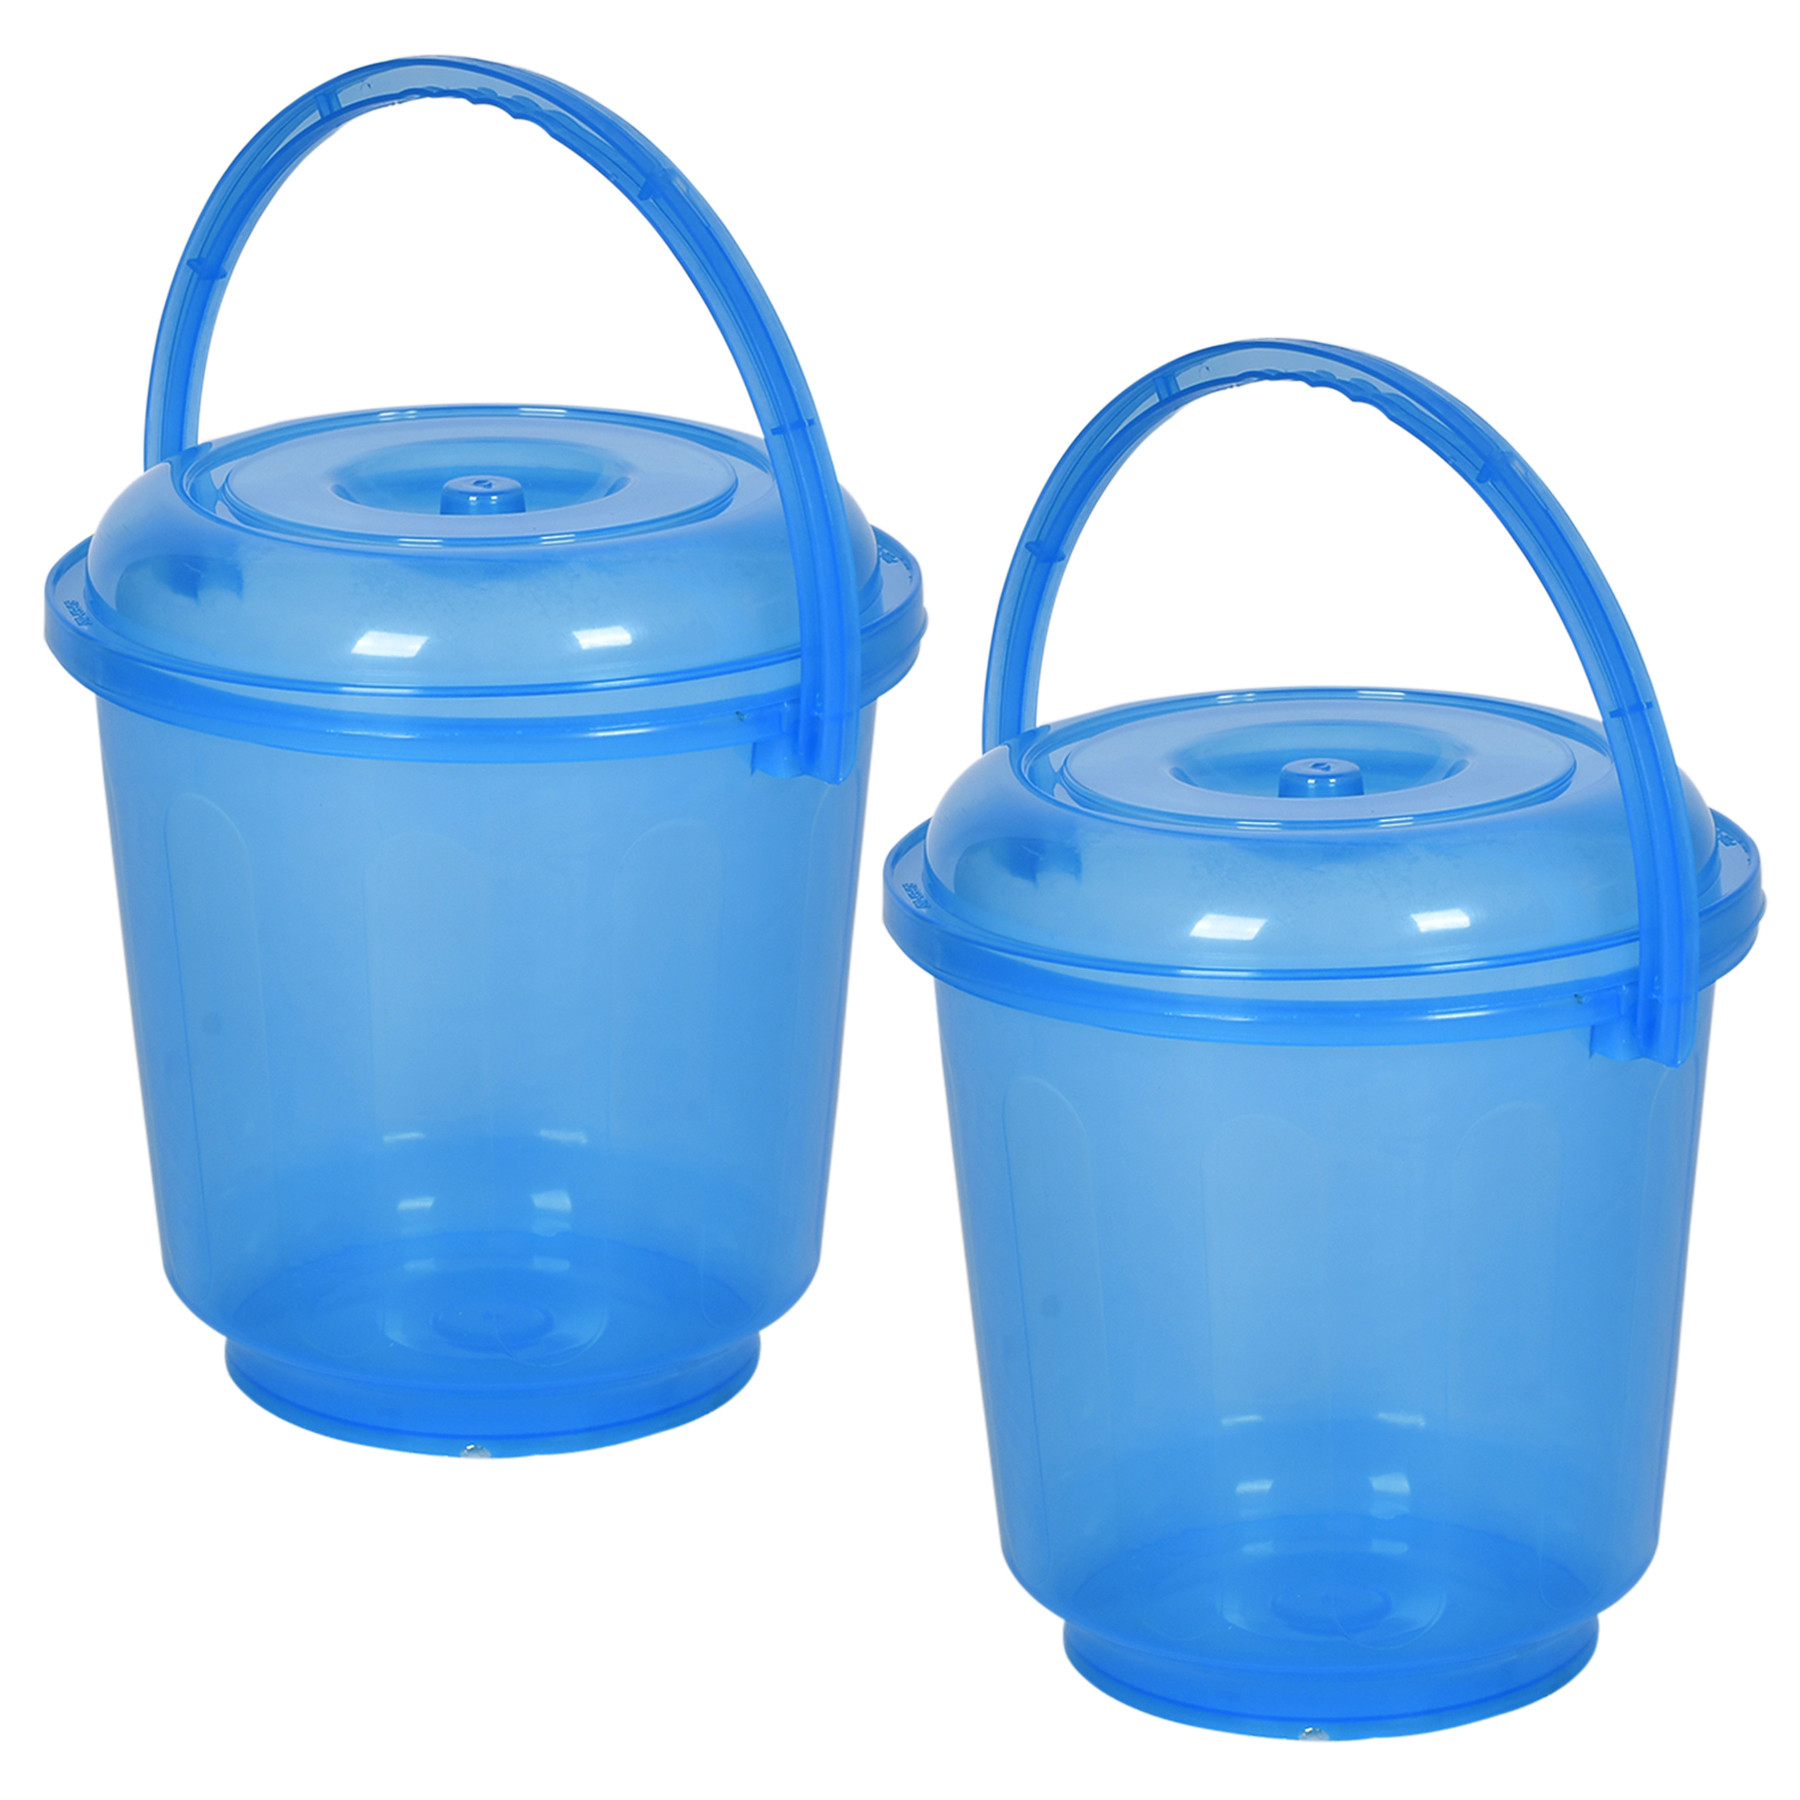 Kuber Industries Bucket | Bathroom Bucket | Utility Bucket for Daily Use | Bucket for Bathing | Water Storage Bucket | Bucket with Handle & Lid | 13 LTR | SUPER-013 | Transparent Blue